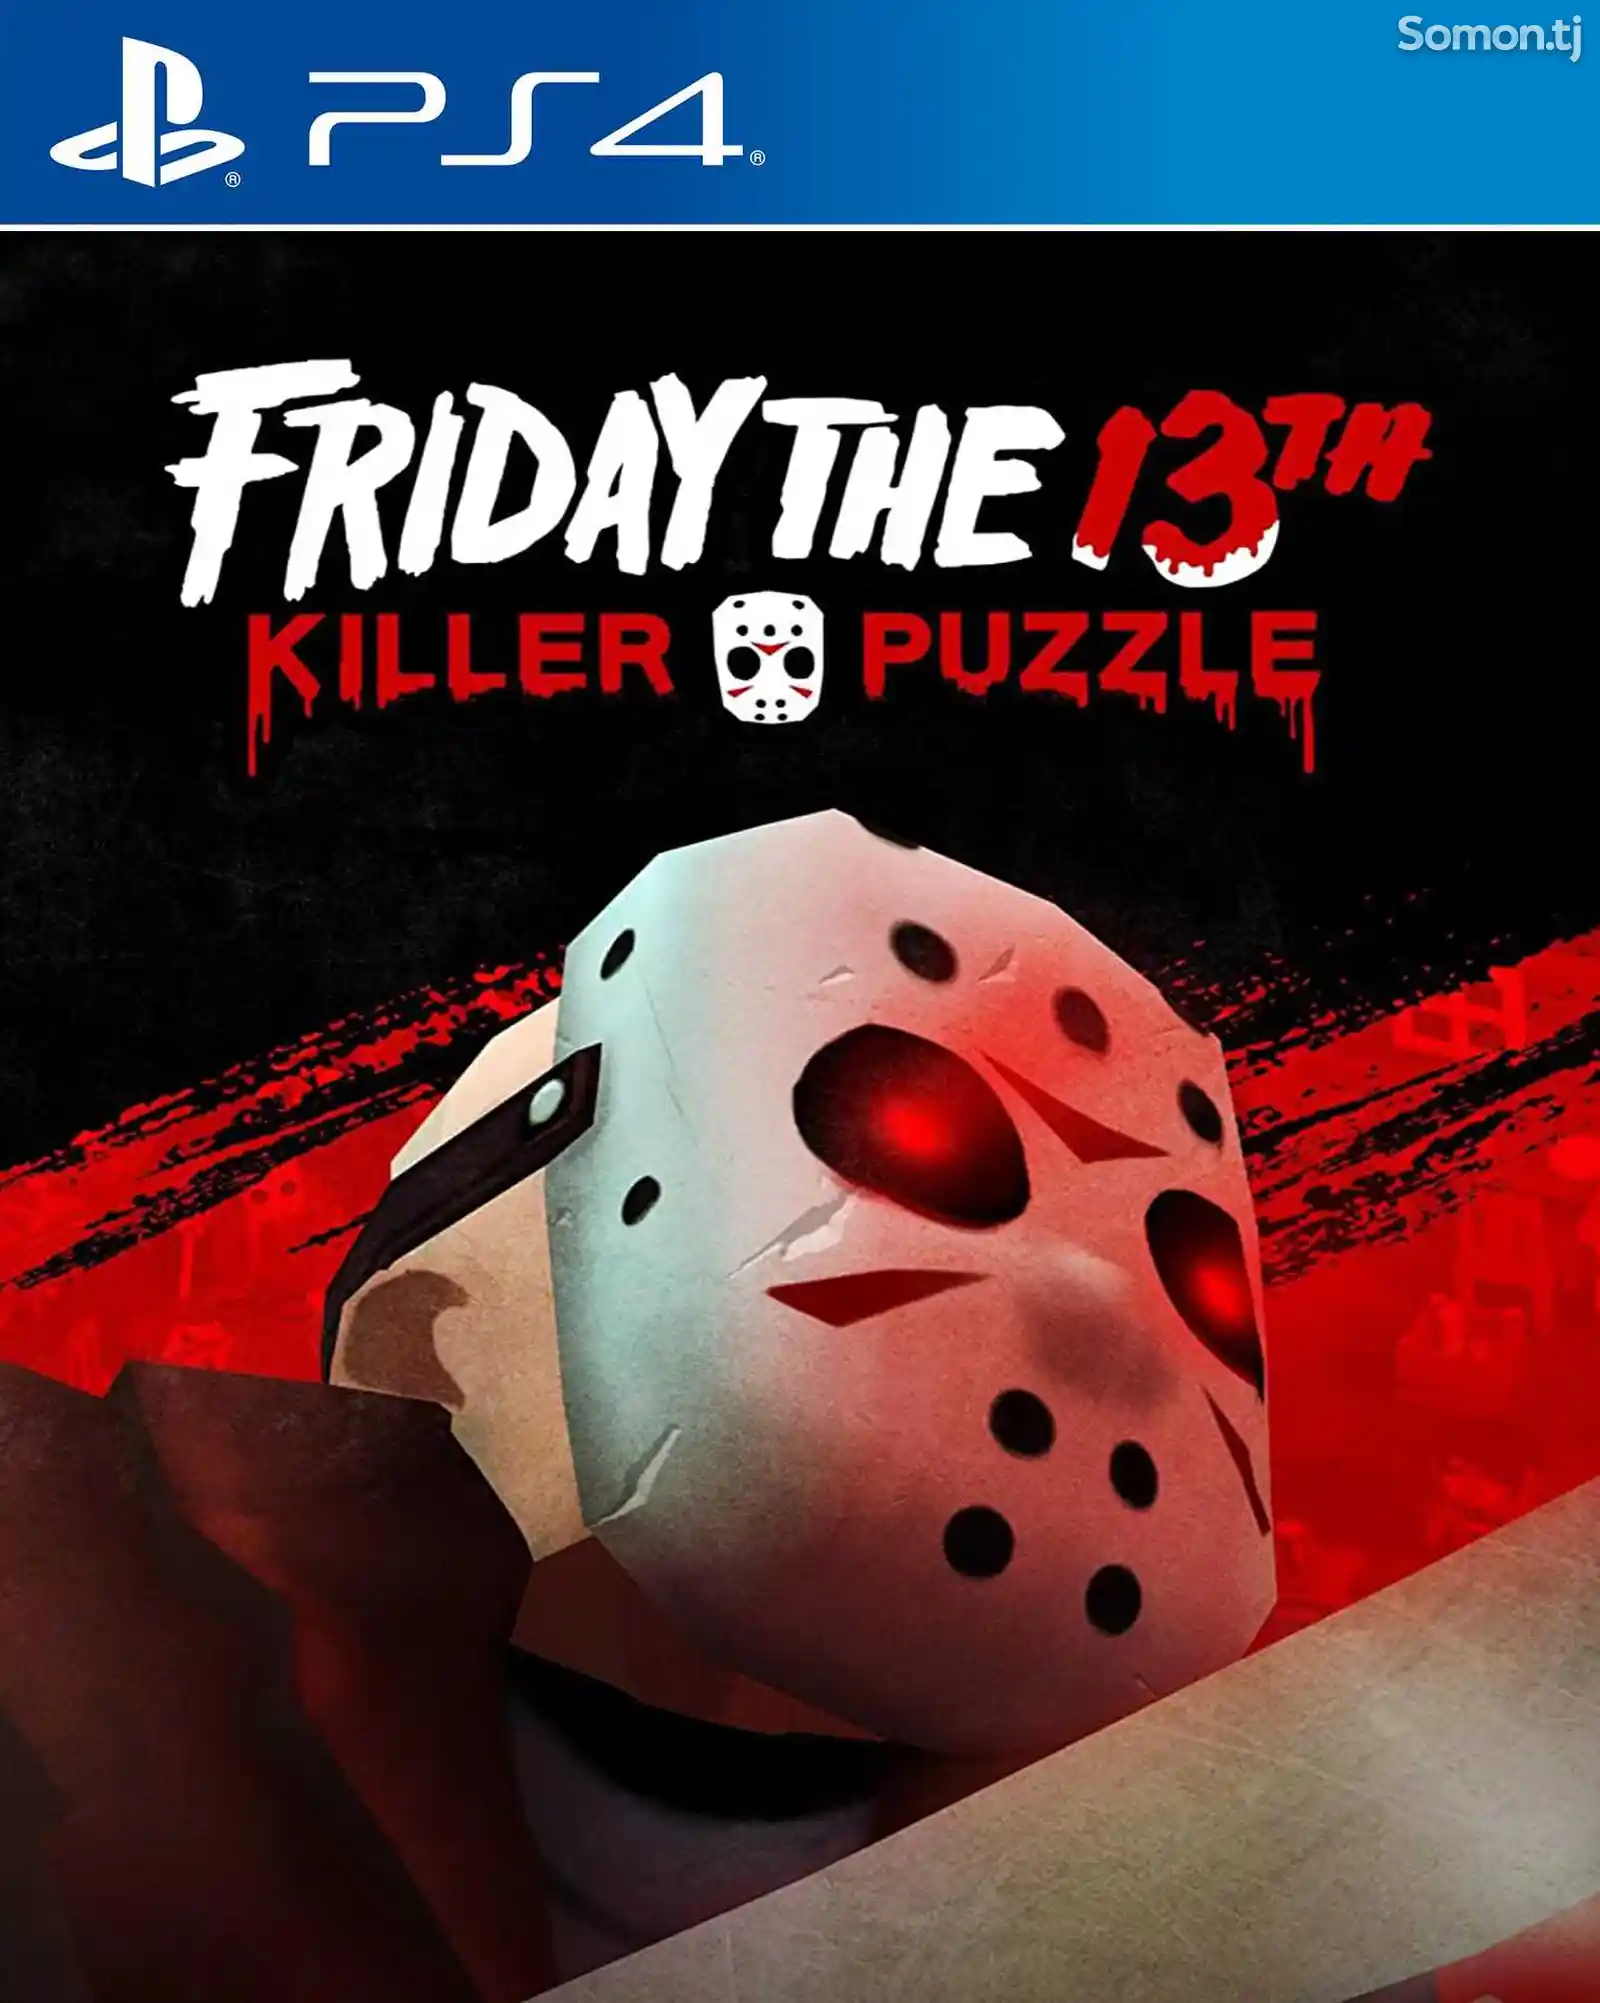 Игра Friday the 13 th killer puzzle для PS-4 / 5.05 / 6.72 / 7.02 / 9.00 /-1